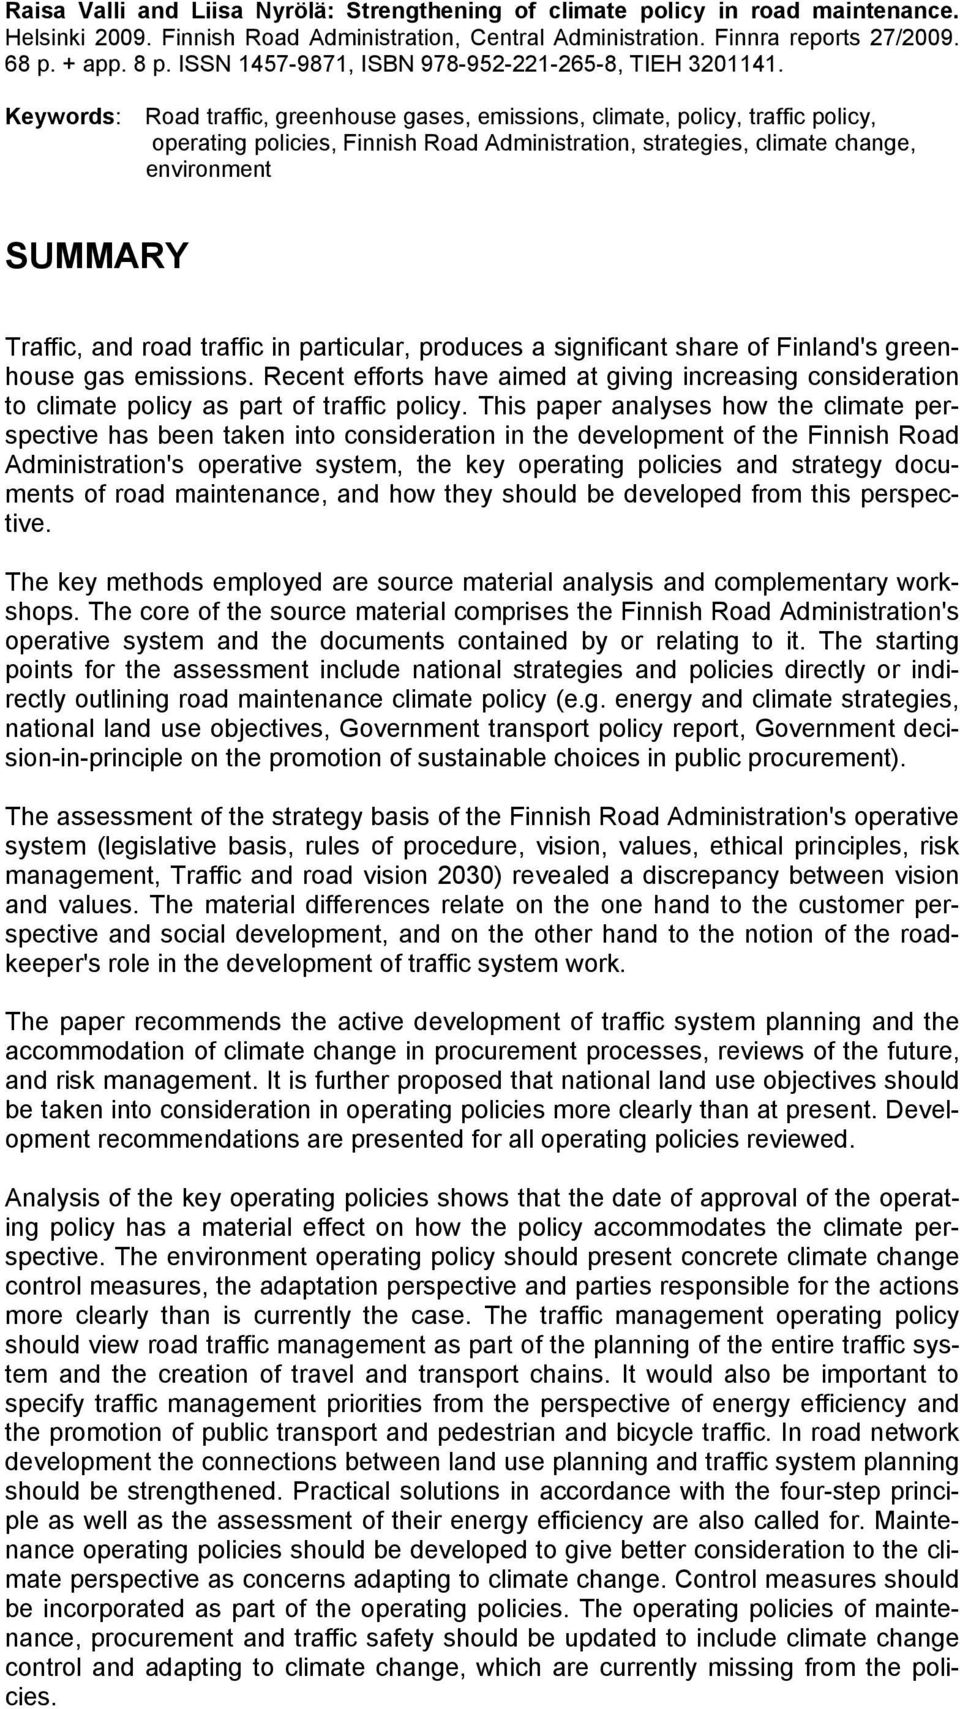 Keywords: Road traffic, greenhouse gases, emissions, climate, policy, traffic policy, operating policies, Finnish Road Administration, strategies, climate change, environment SUMMARY Traffic, and